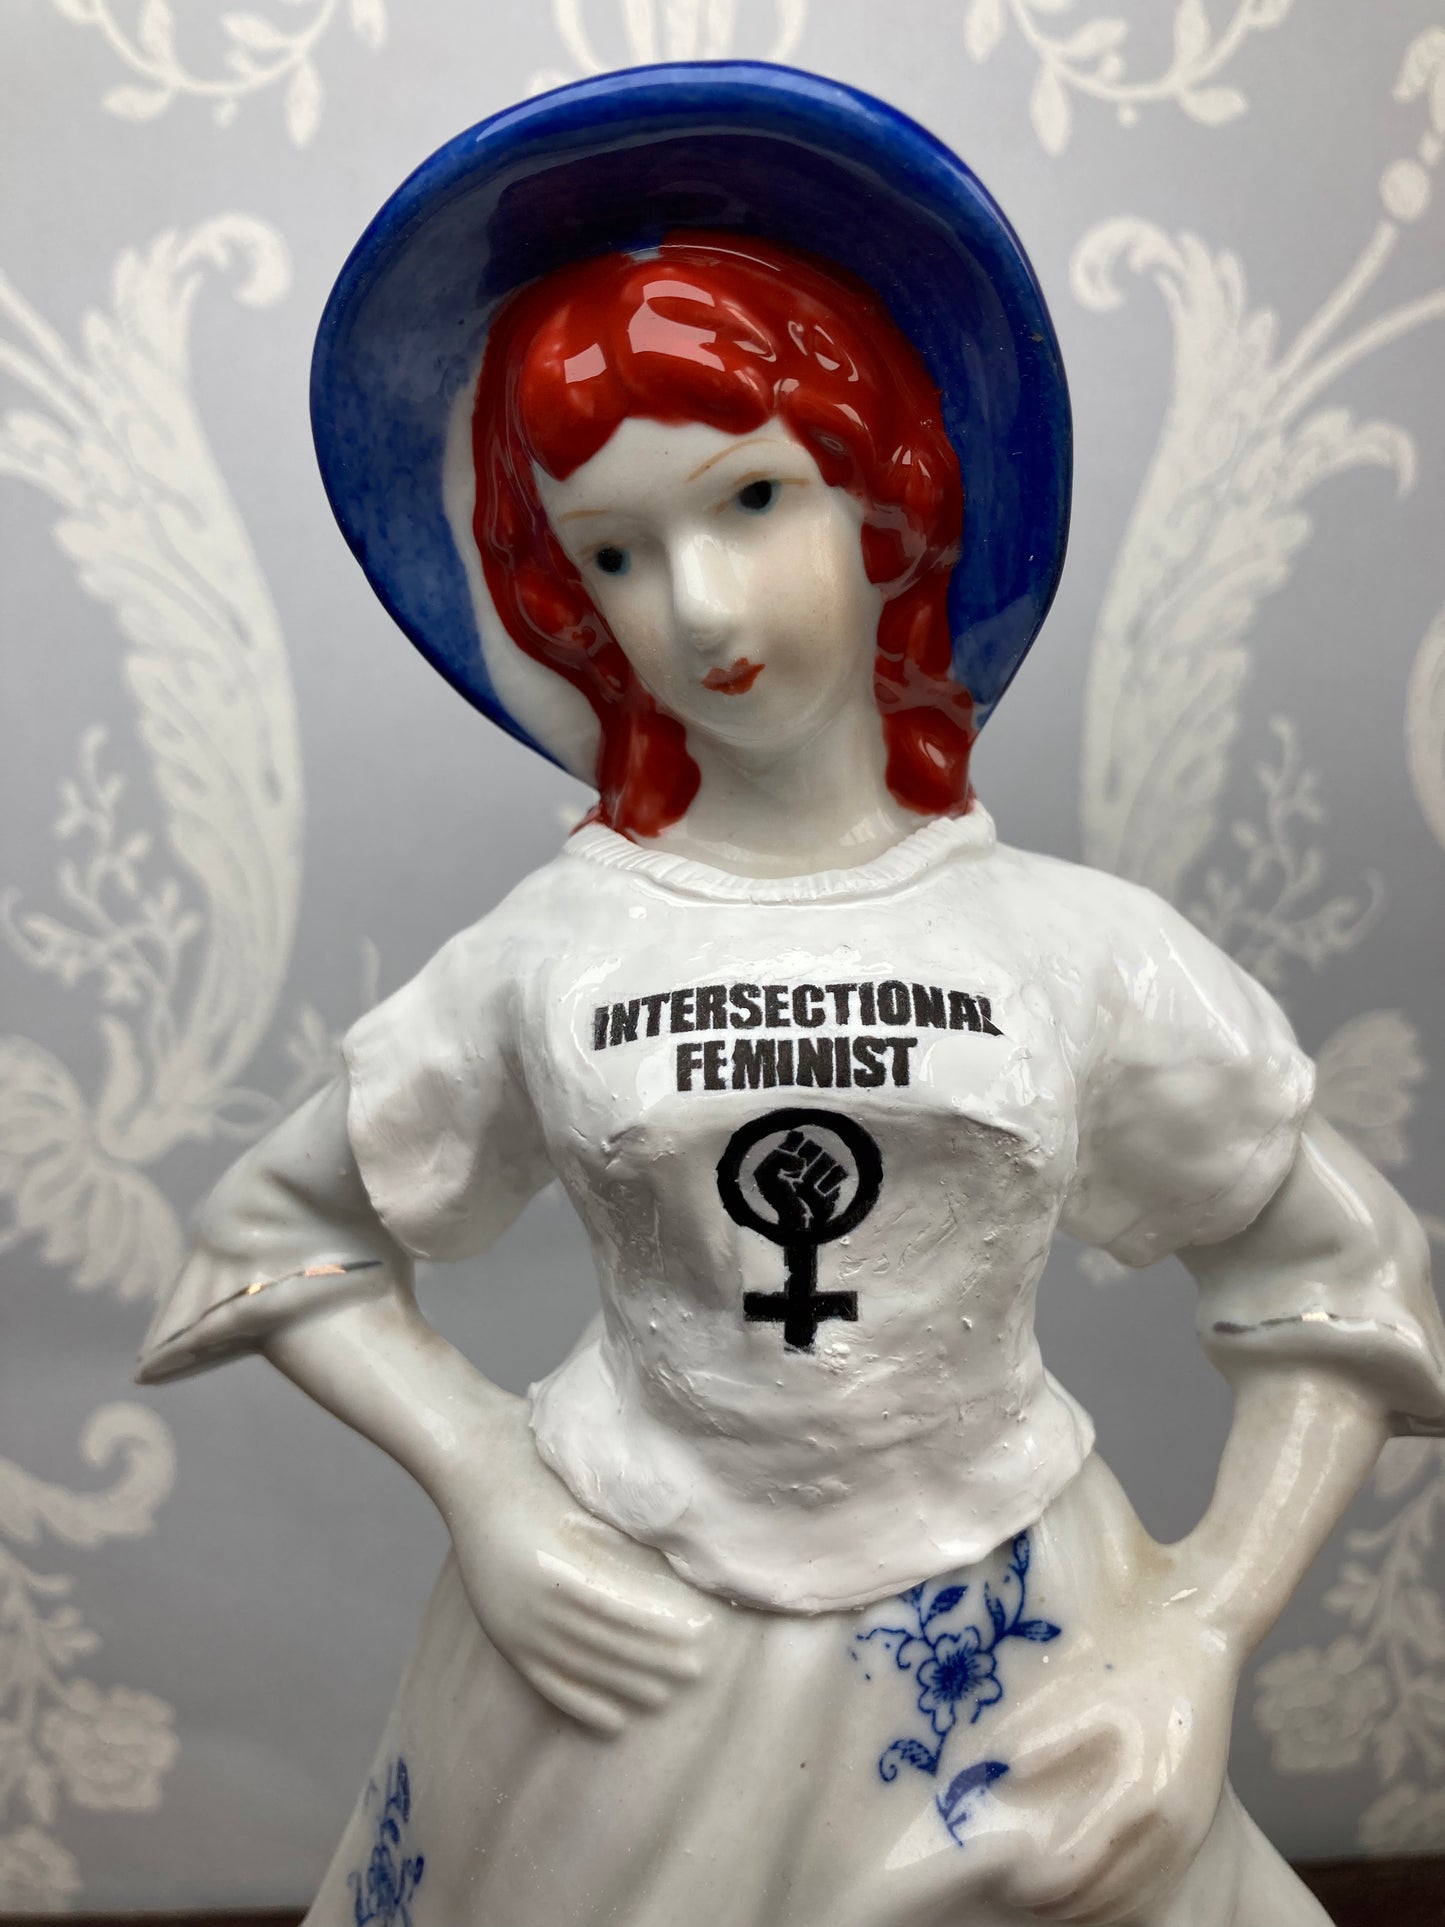 Intersectional Feminist